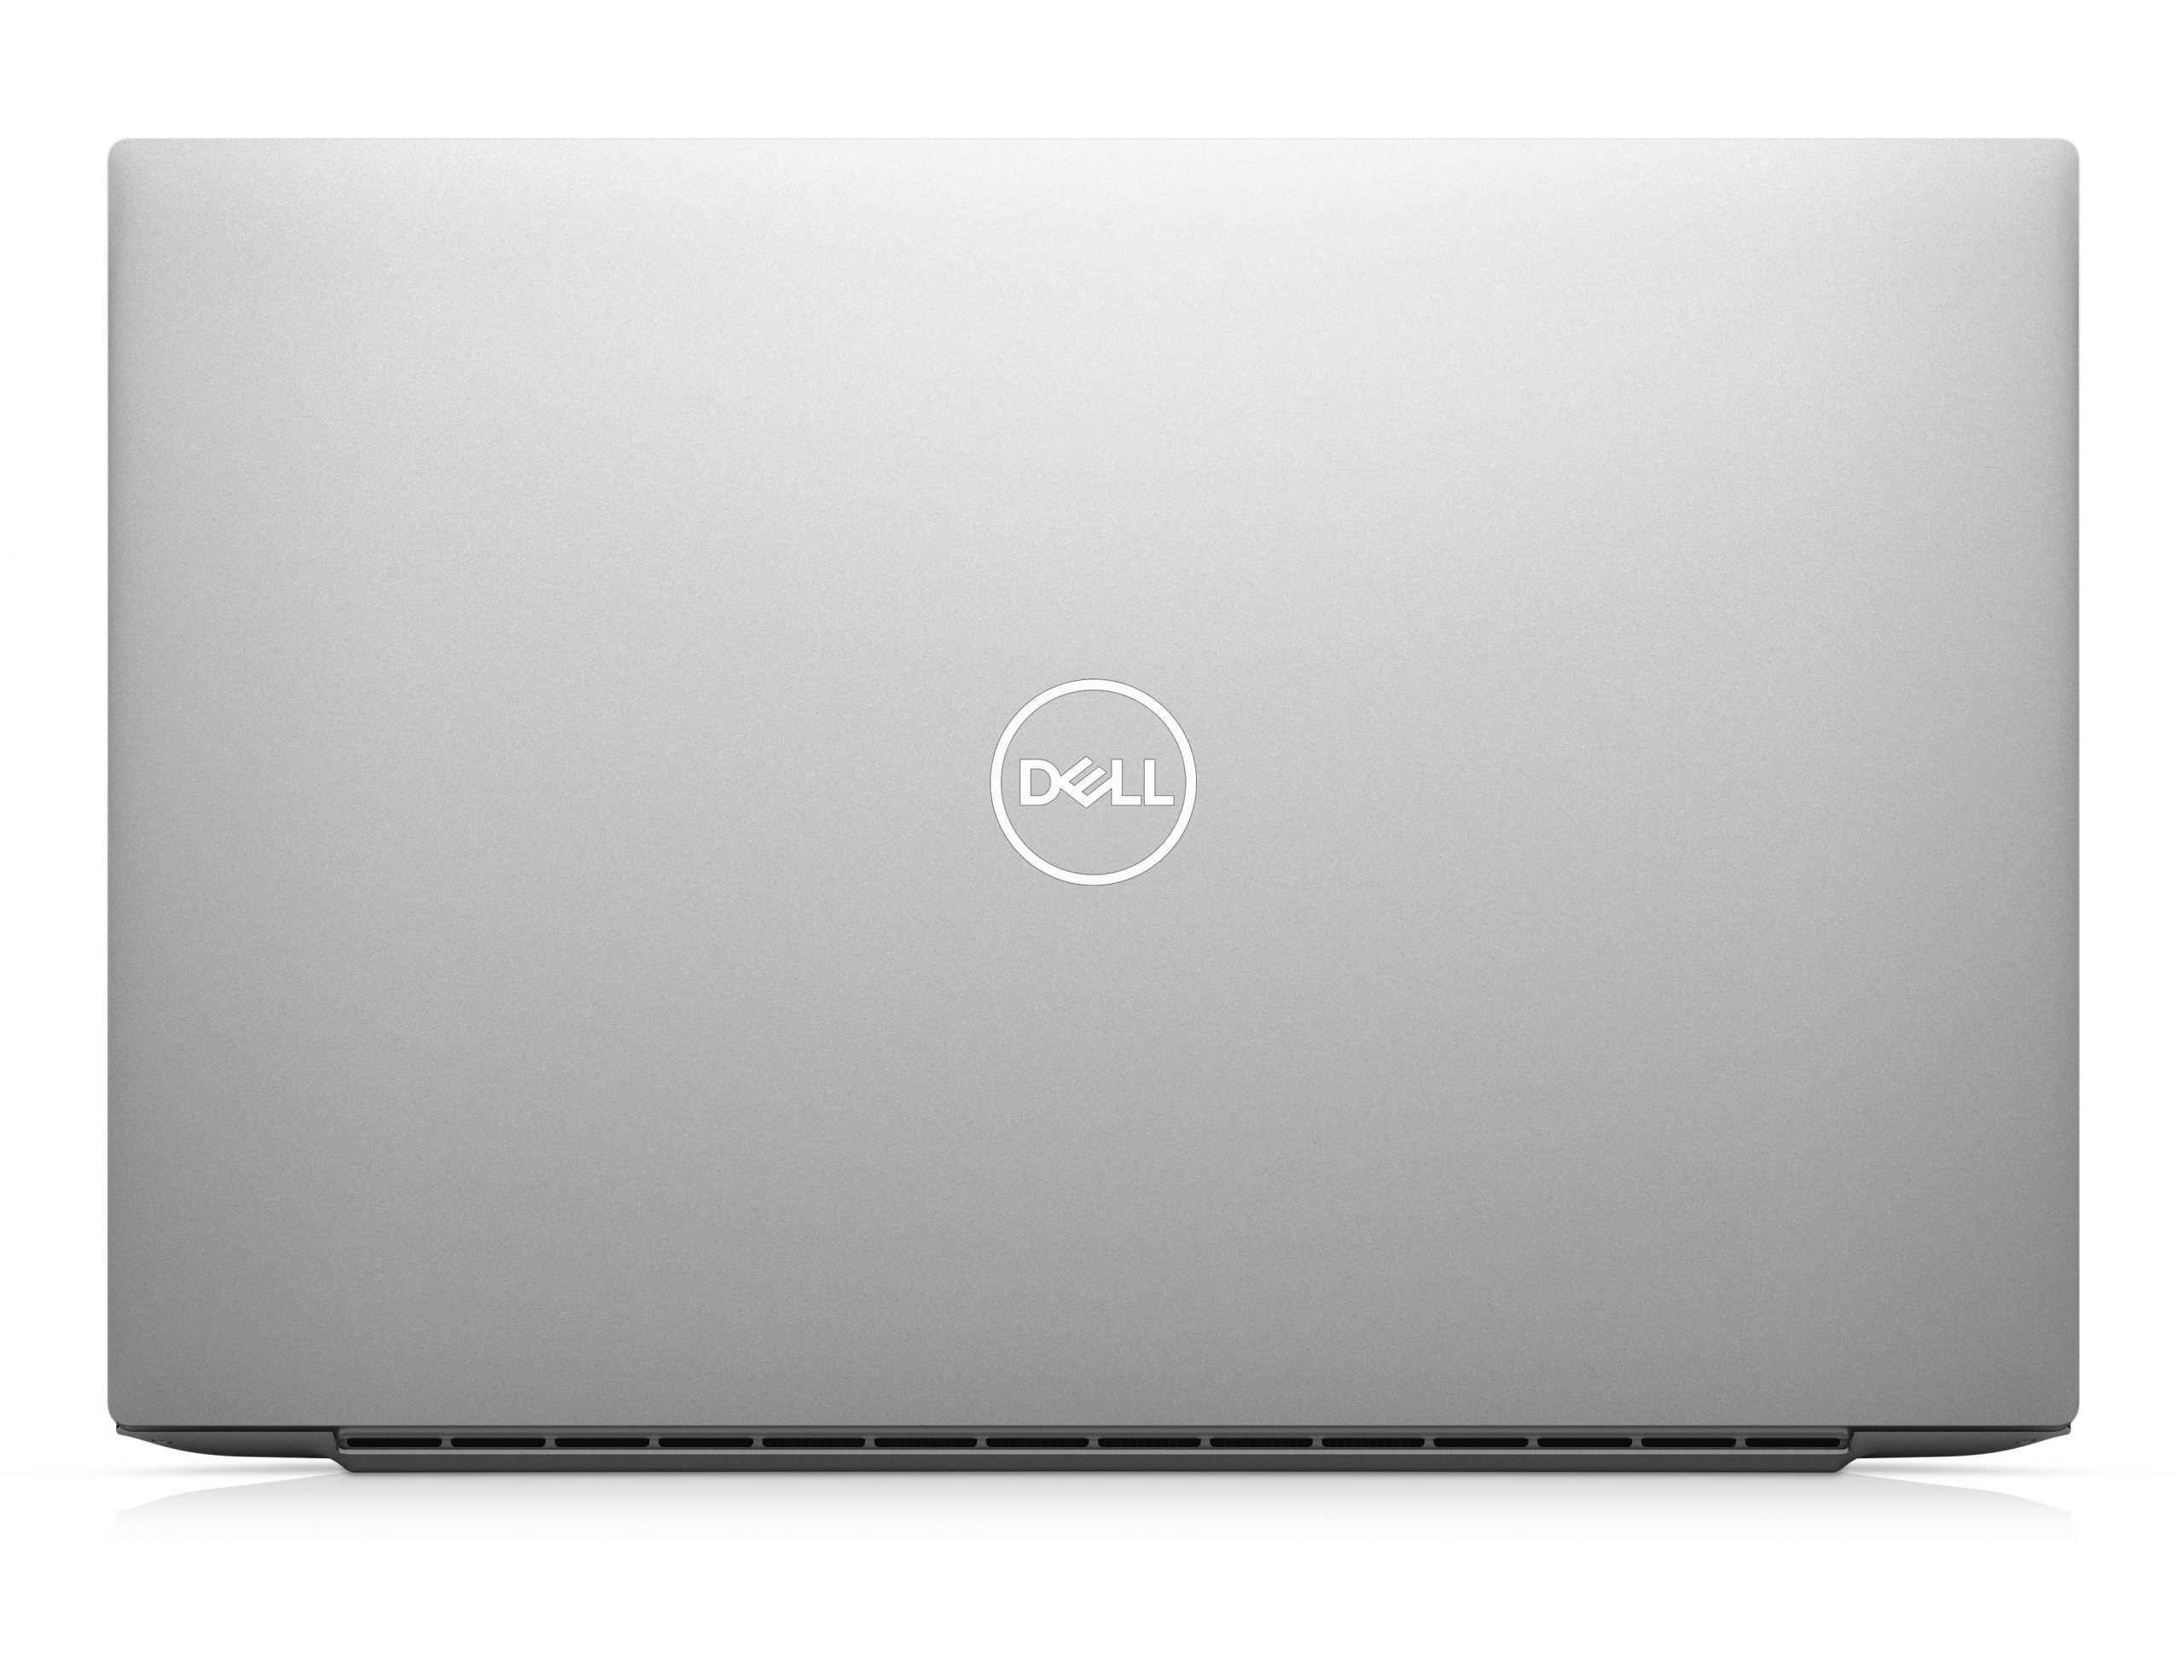 DELL XPS 17 9700 Workstation and gaming notebook 17″ Inch 4K | Intel Core i7-10750H 2.6Ghz | Ram 32Gb DDR4 | SSD 2Tb | Nvidia GTX 1650Ti 4Gb | Windows 10 Pro